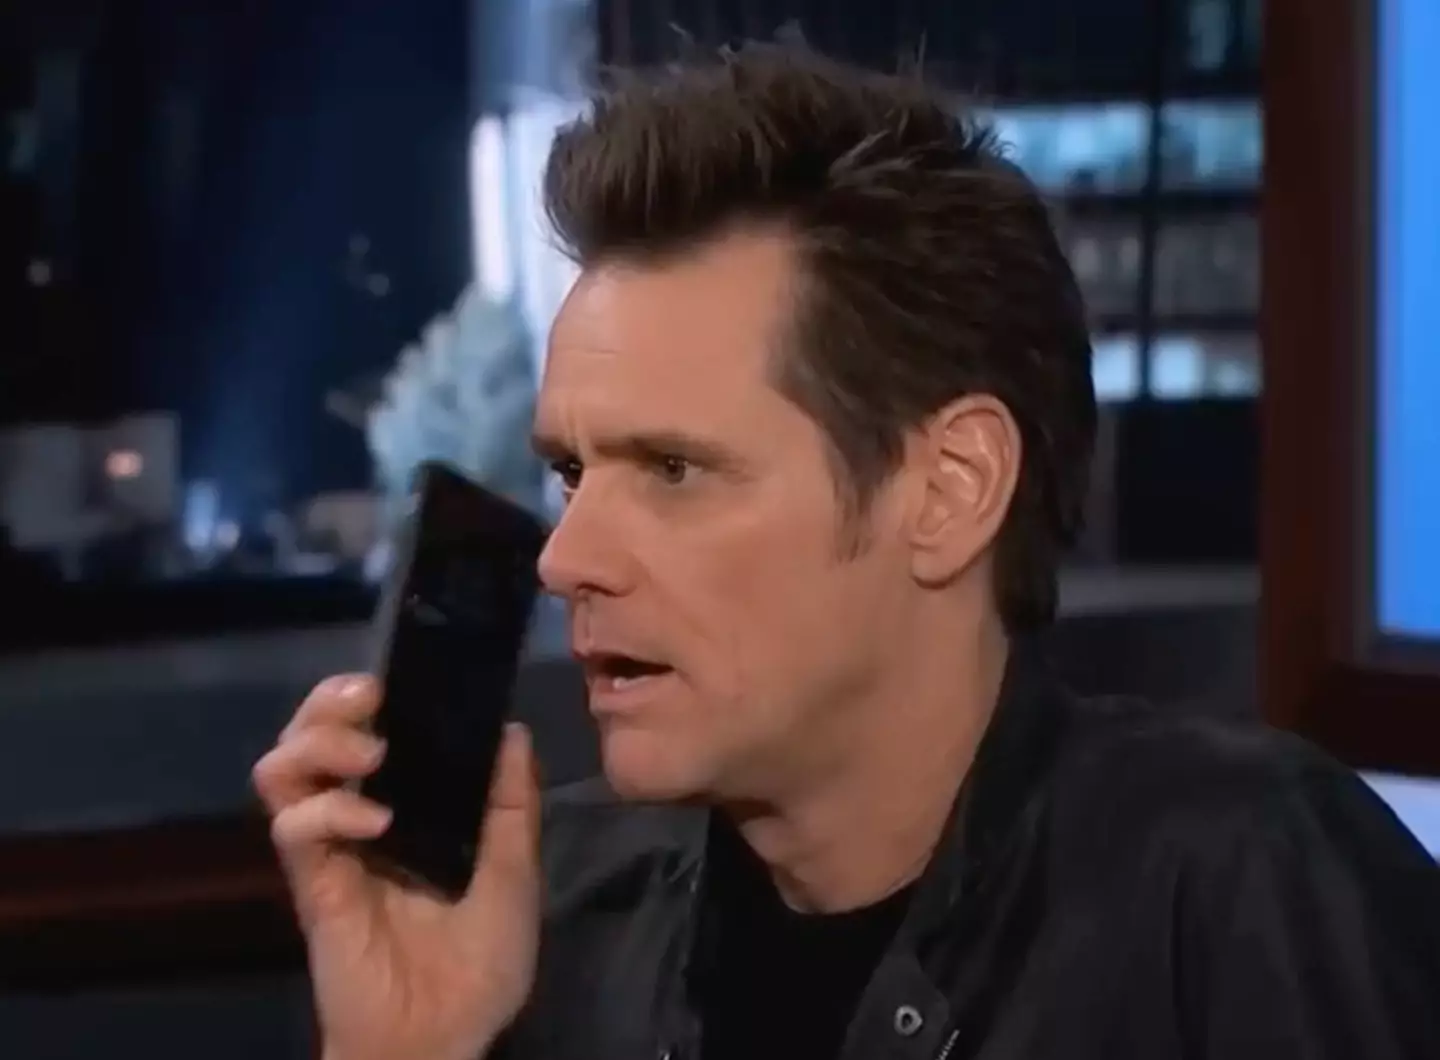 Carrey ended up being 'hypnotized'.